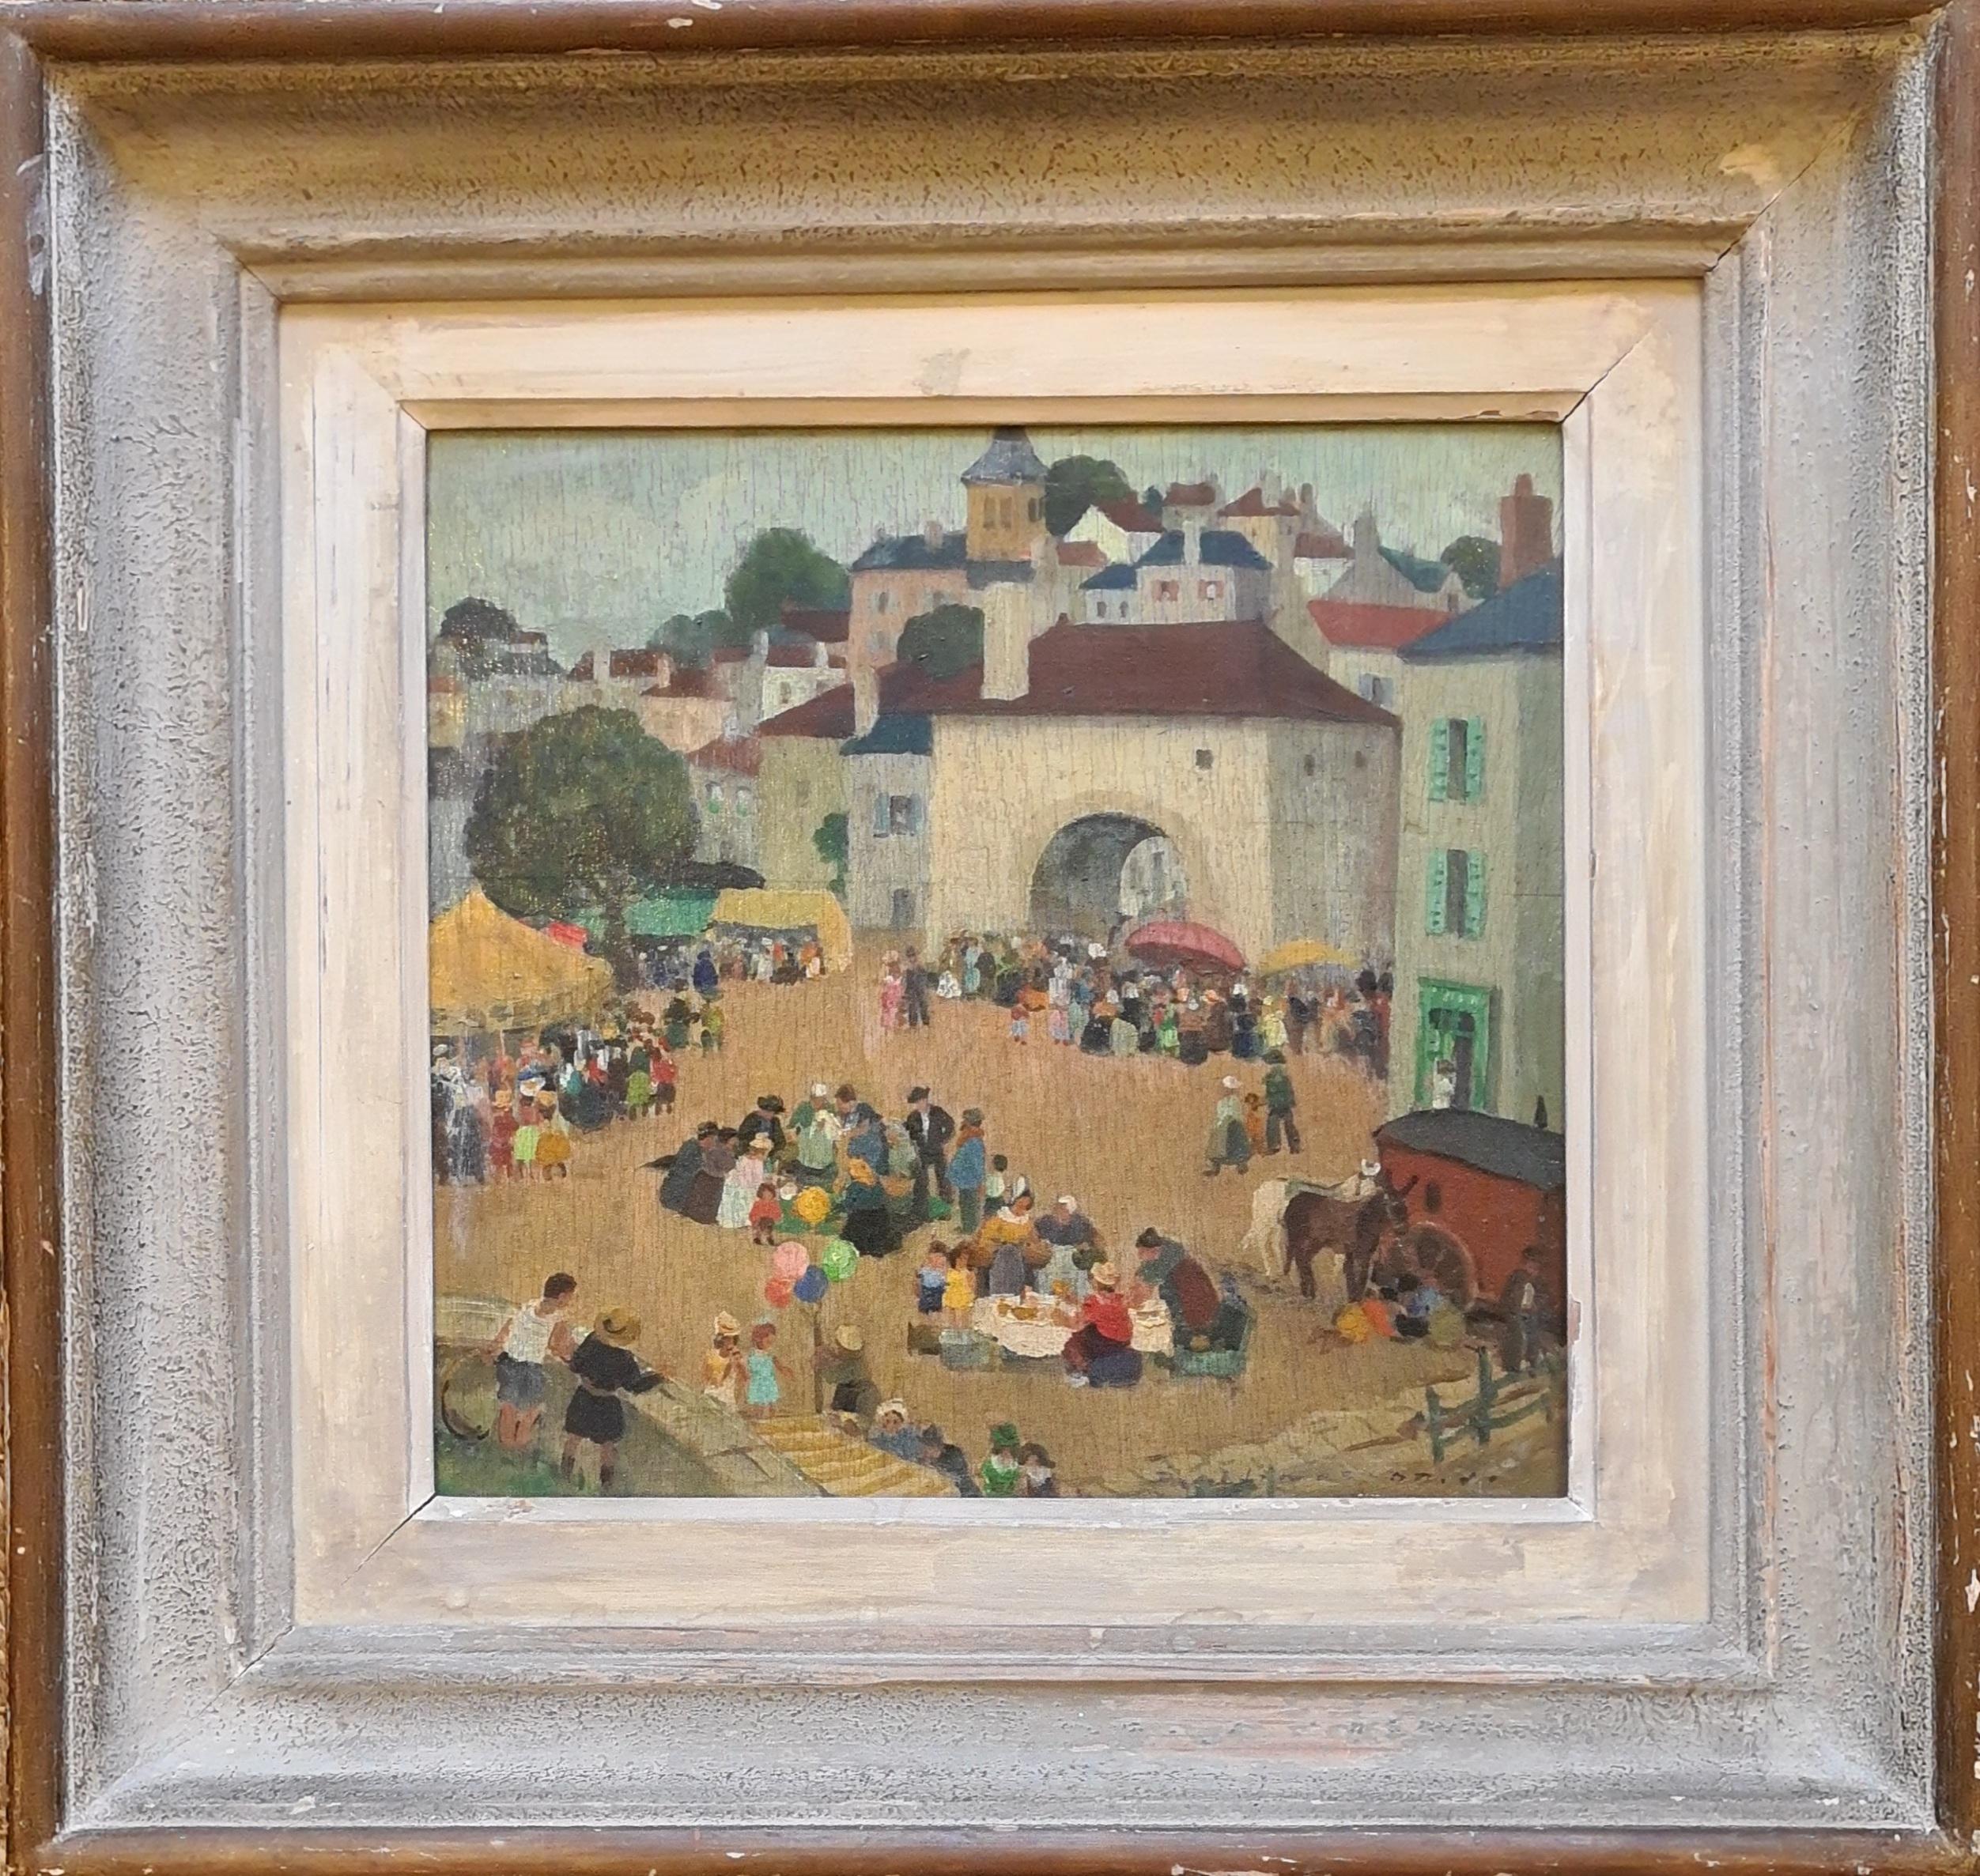 Colourful MidCentury Village Scene, Hommage to Brueghel, All the Fun of the Fair - Painting by Paul Lemasson